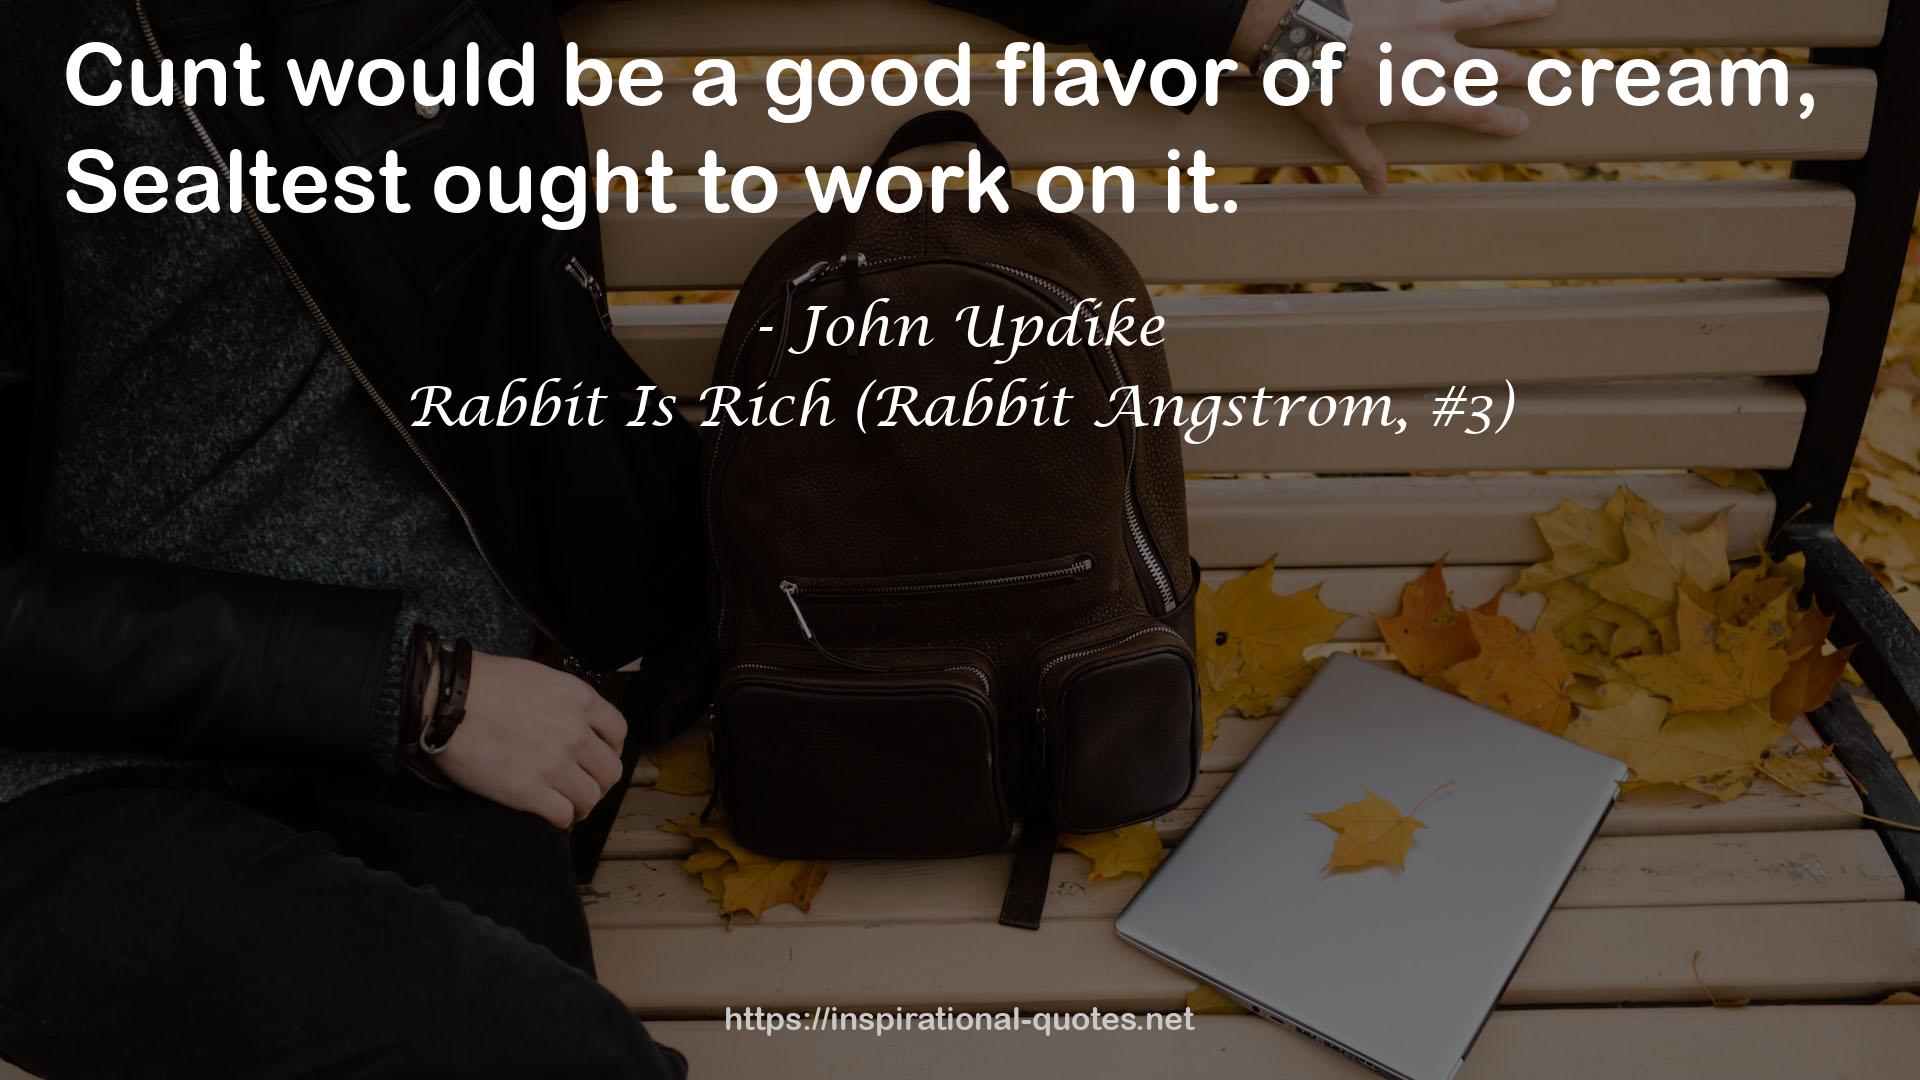 Rabbit Is Rich (Rabbit Angstrom, #3) QUOTES